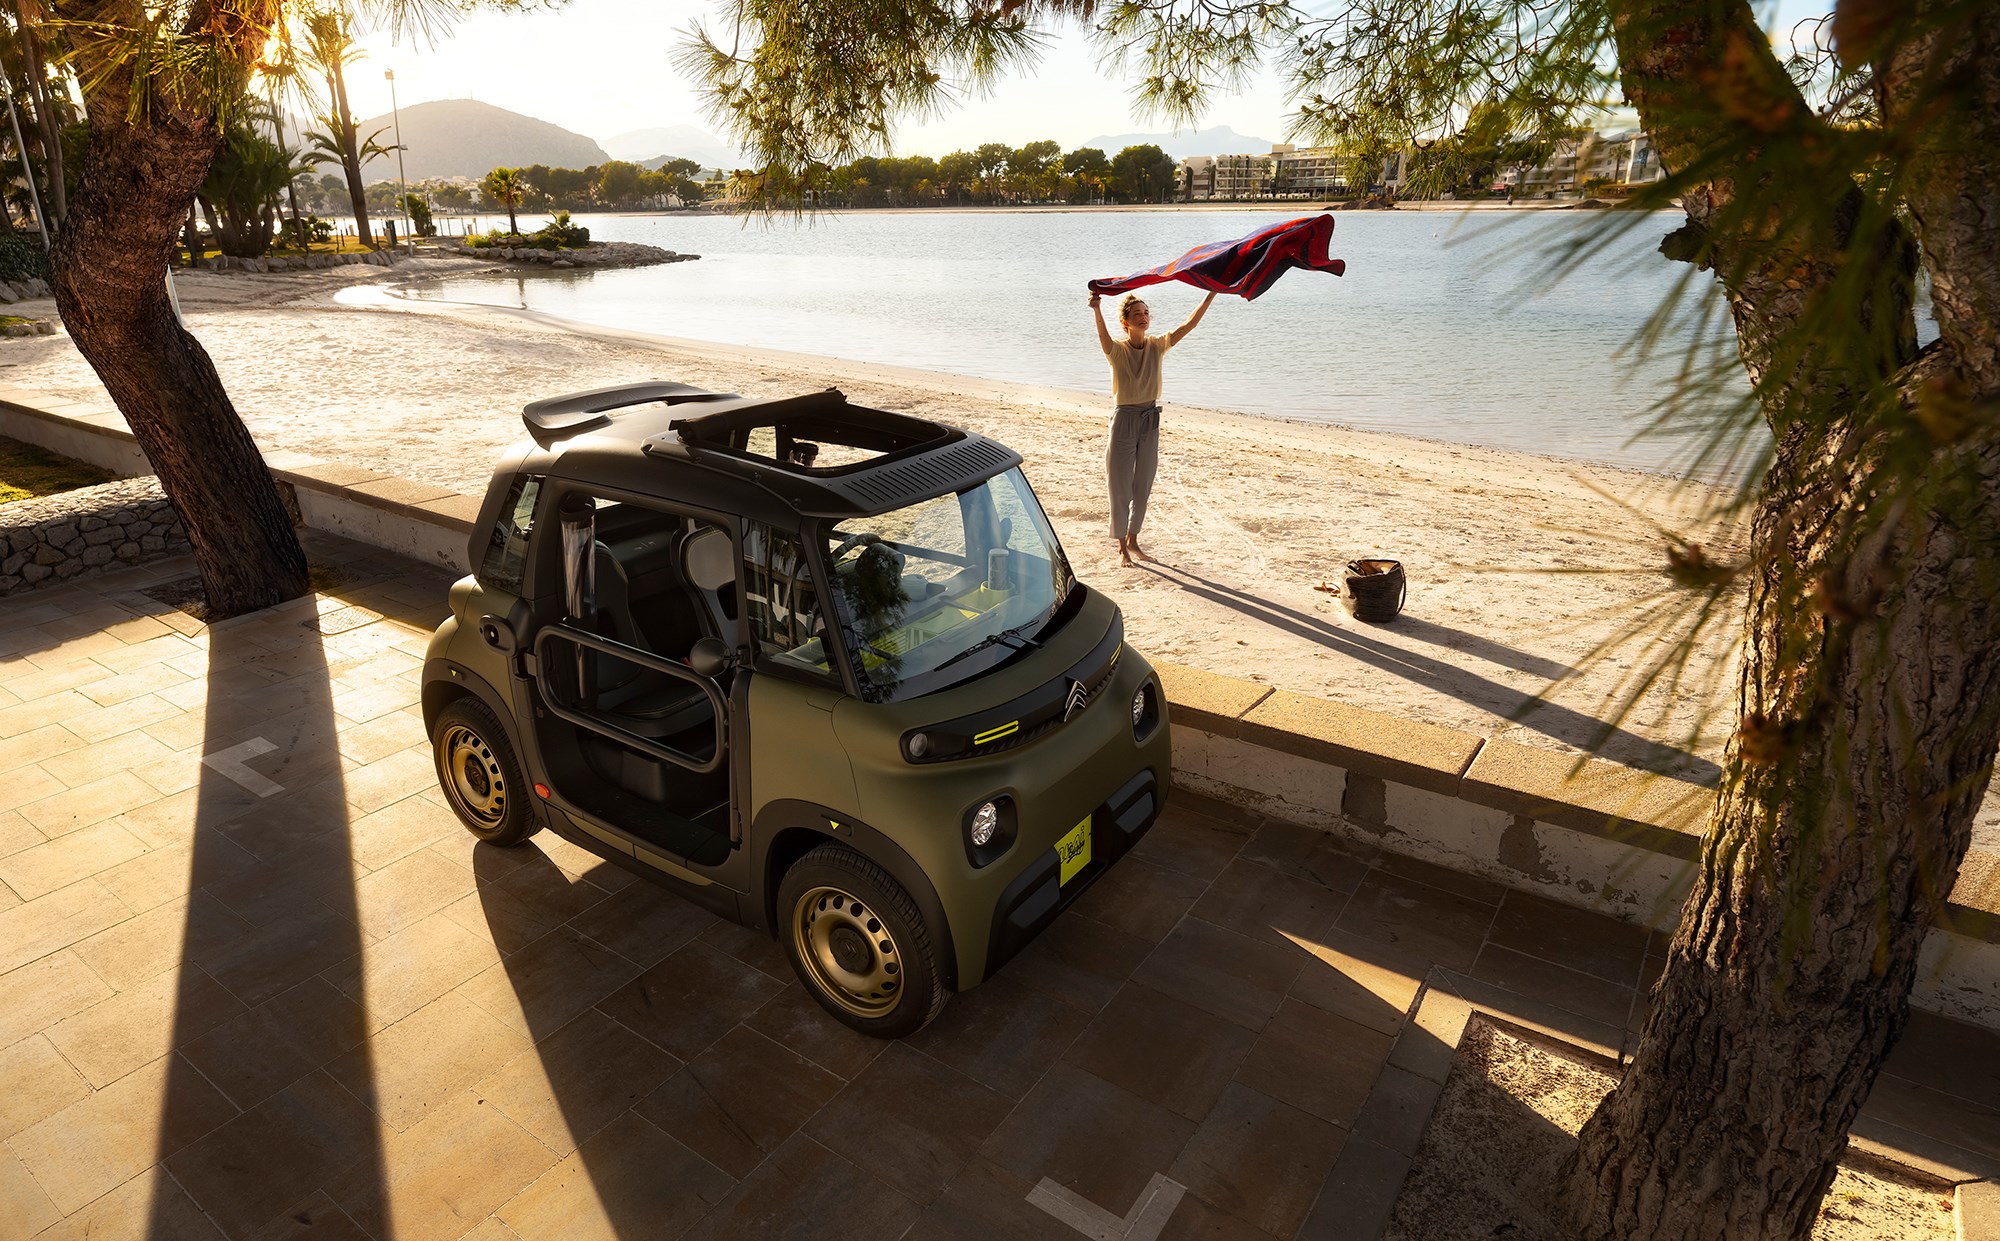 Citroen My Ami Buggy 2 comes to UK beachsides in 2023